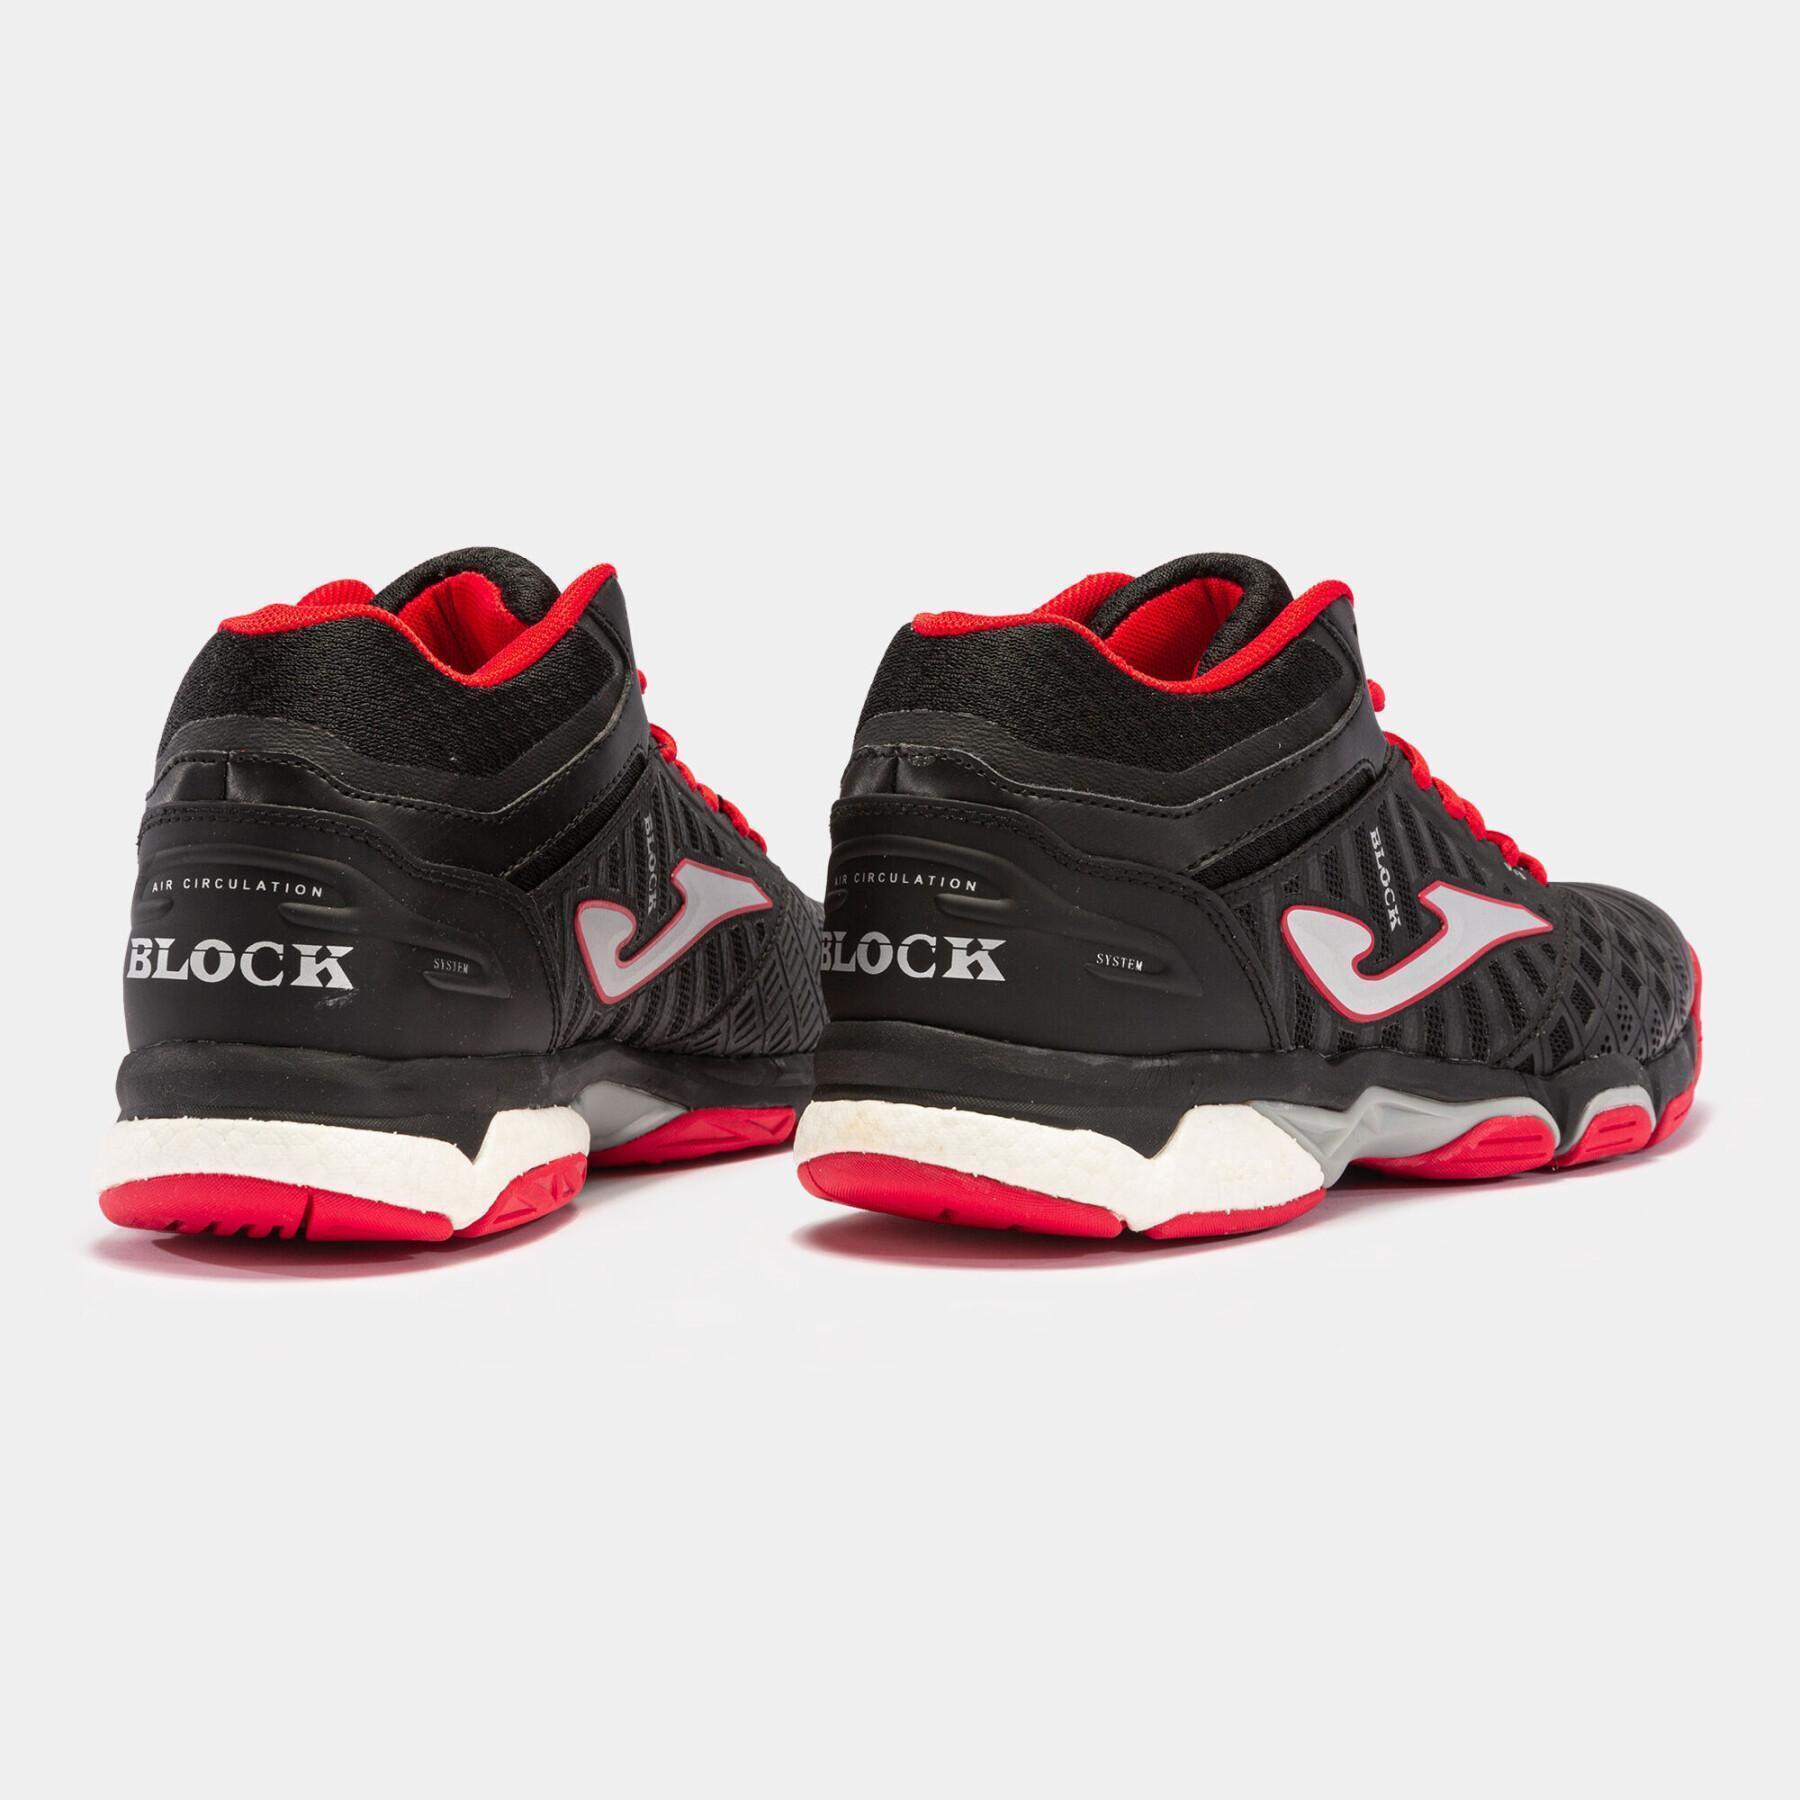 Chaussures de volleyball Joma V.Block 2301